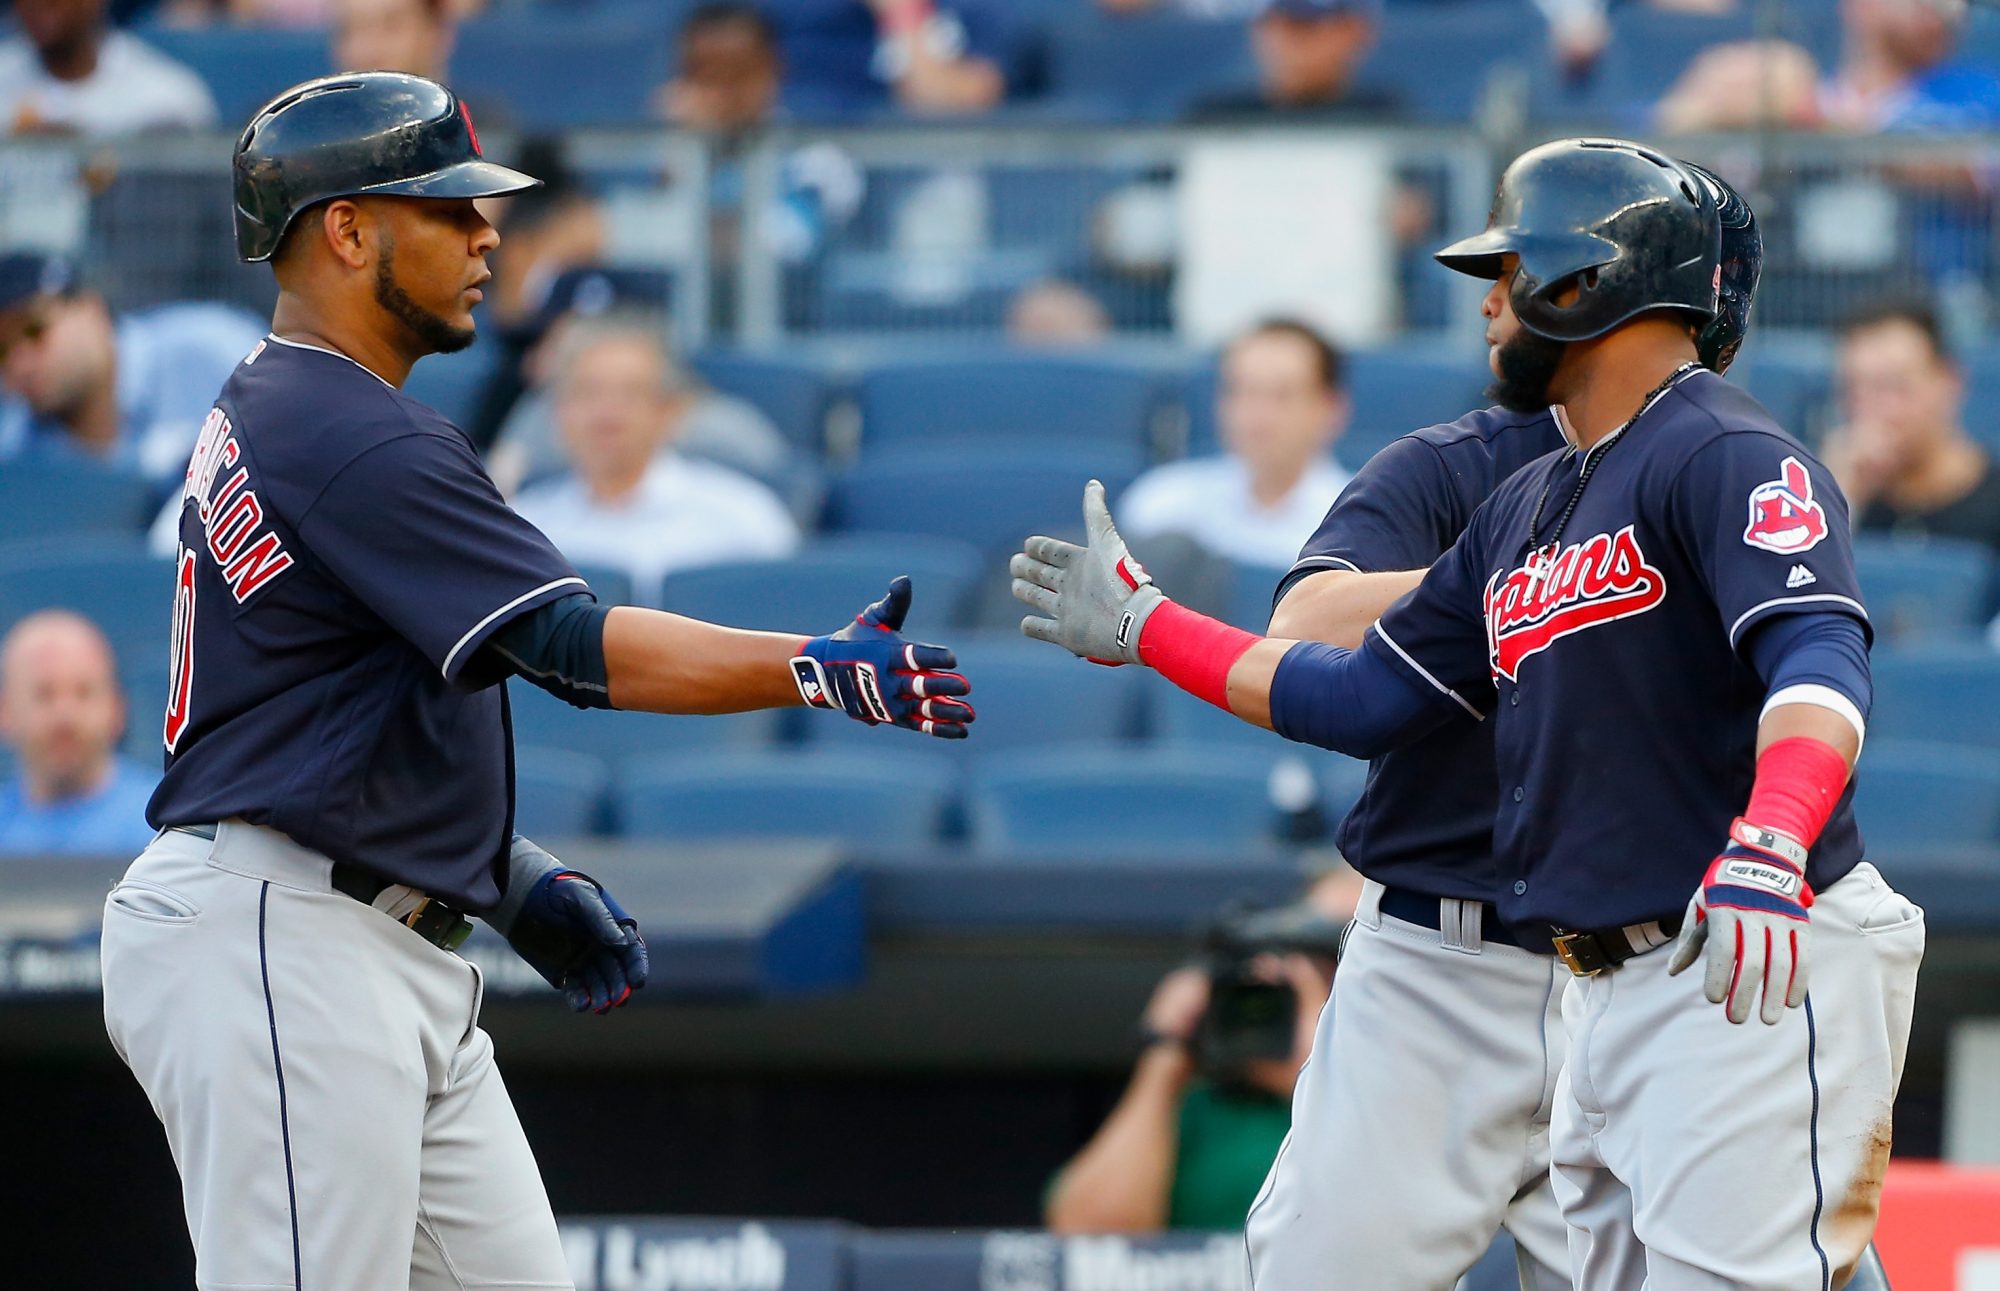 Indians Dismantle New York Yankees In Game 2 En Route To Series Sweep 